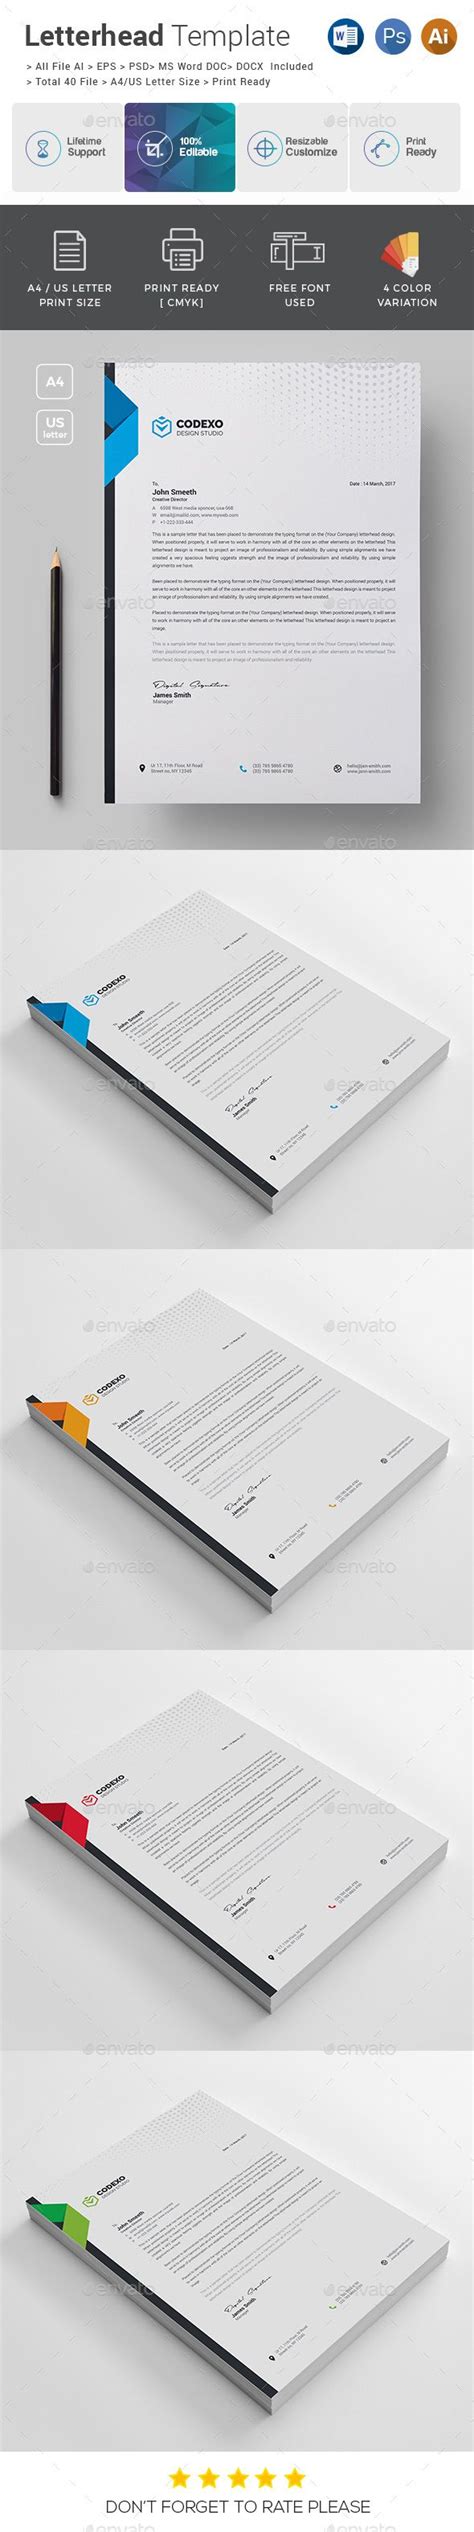 Letterhead templates are a valuable tool to help your staff maintain brand consistency and streamline work. Corporate Letterhead Template | Letterhead template ...